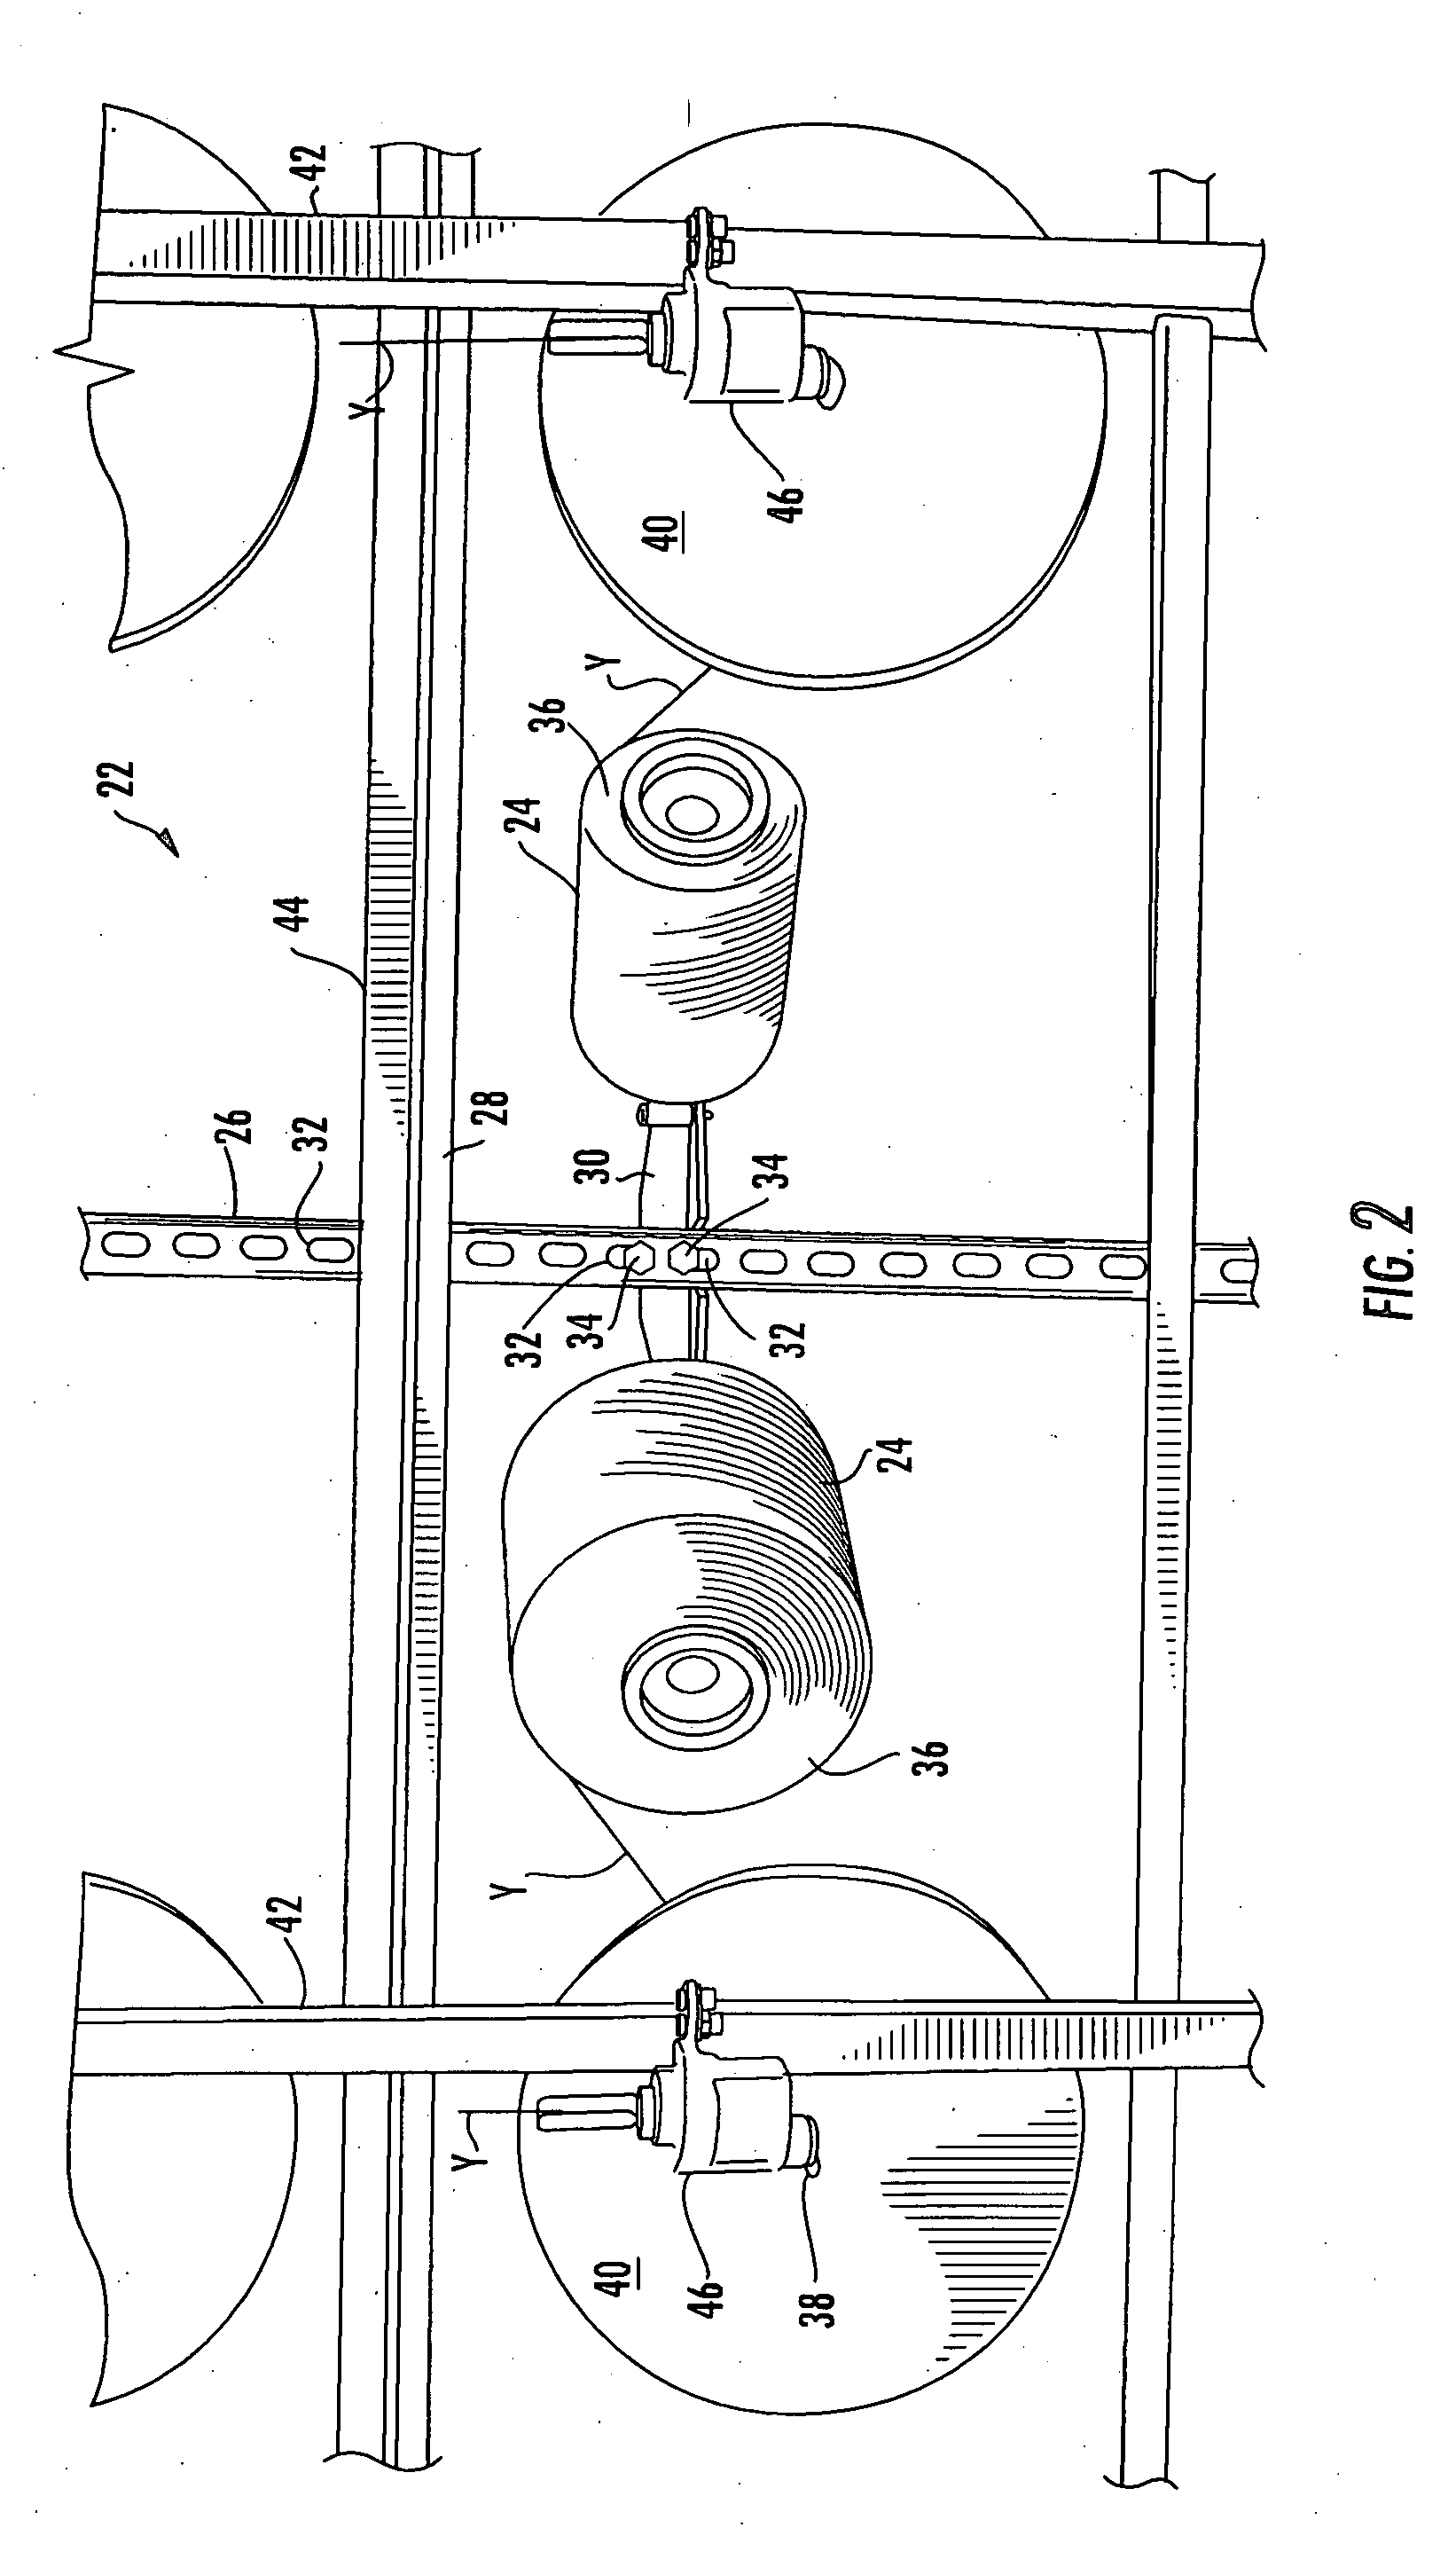 Yarn package supporting bracket for use on a creel